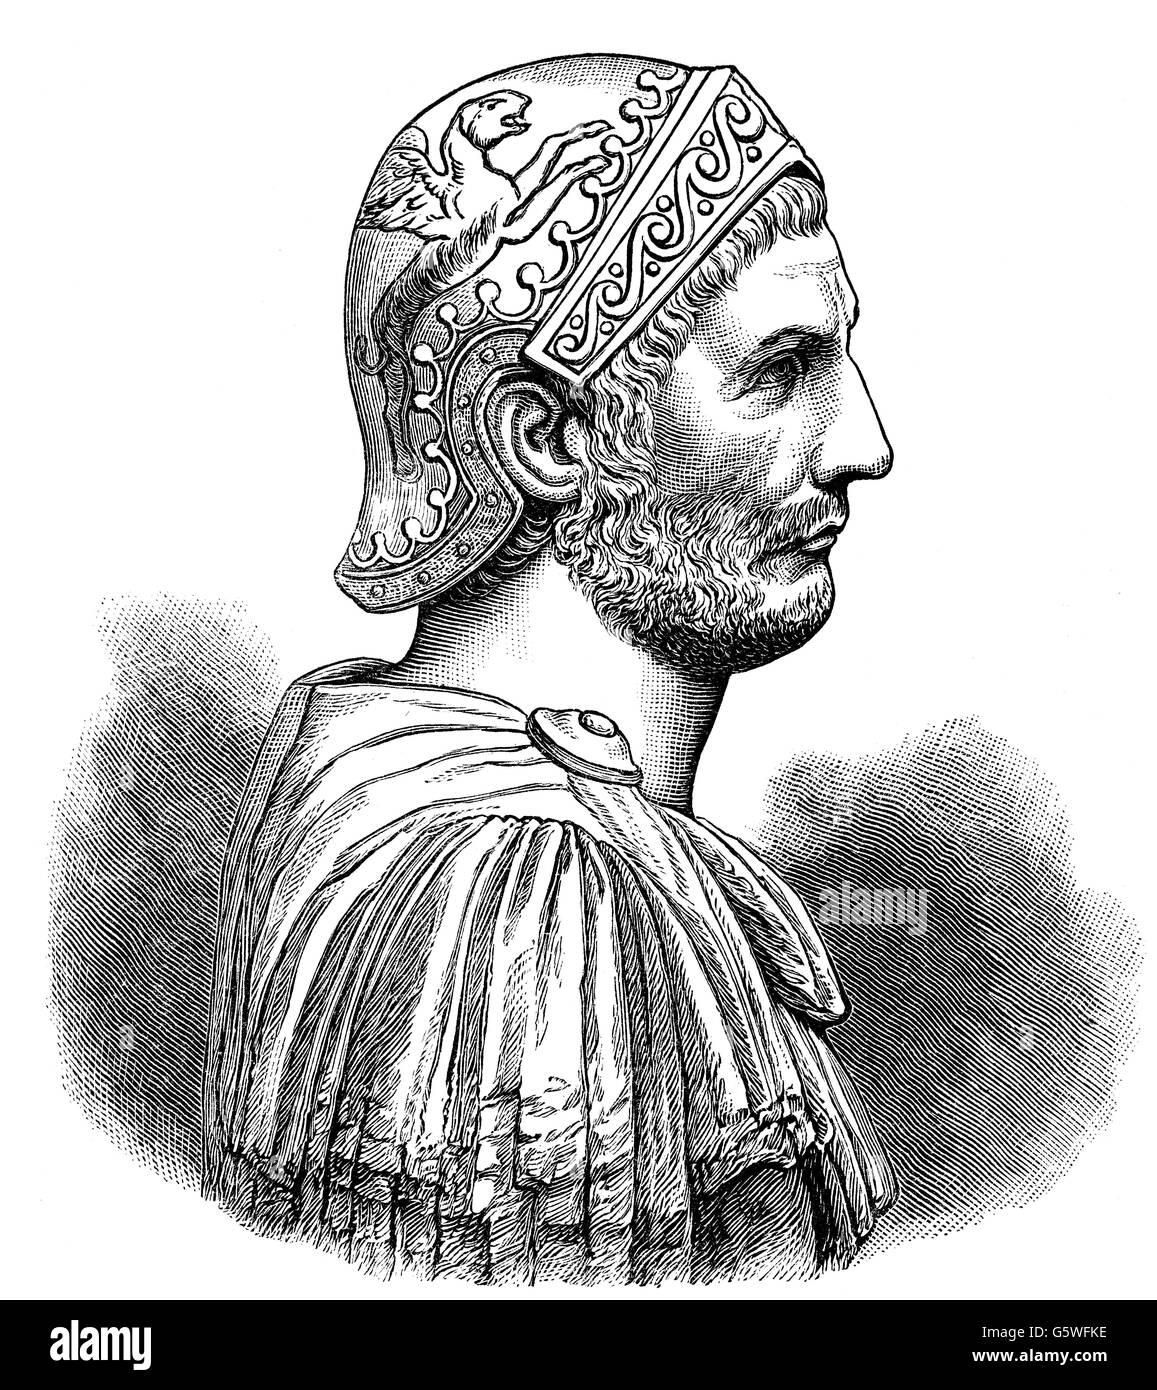 Hannibal, 247 - 183 BC, Carthaginian general, portrait, after bust from the Naples National Archaeological Museum, wood engraving, 19th century, Stock Photo